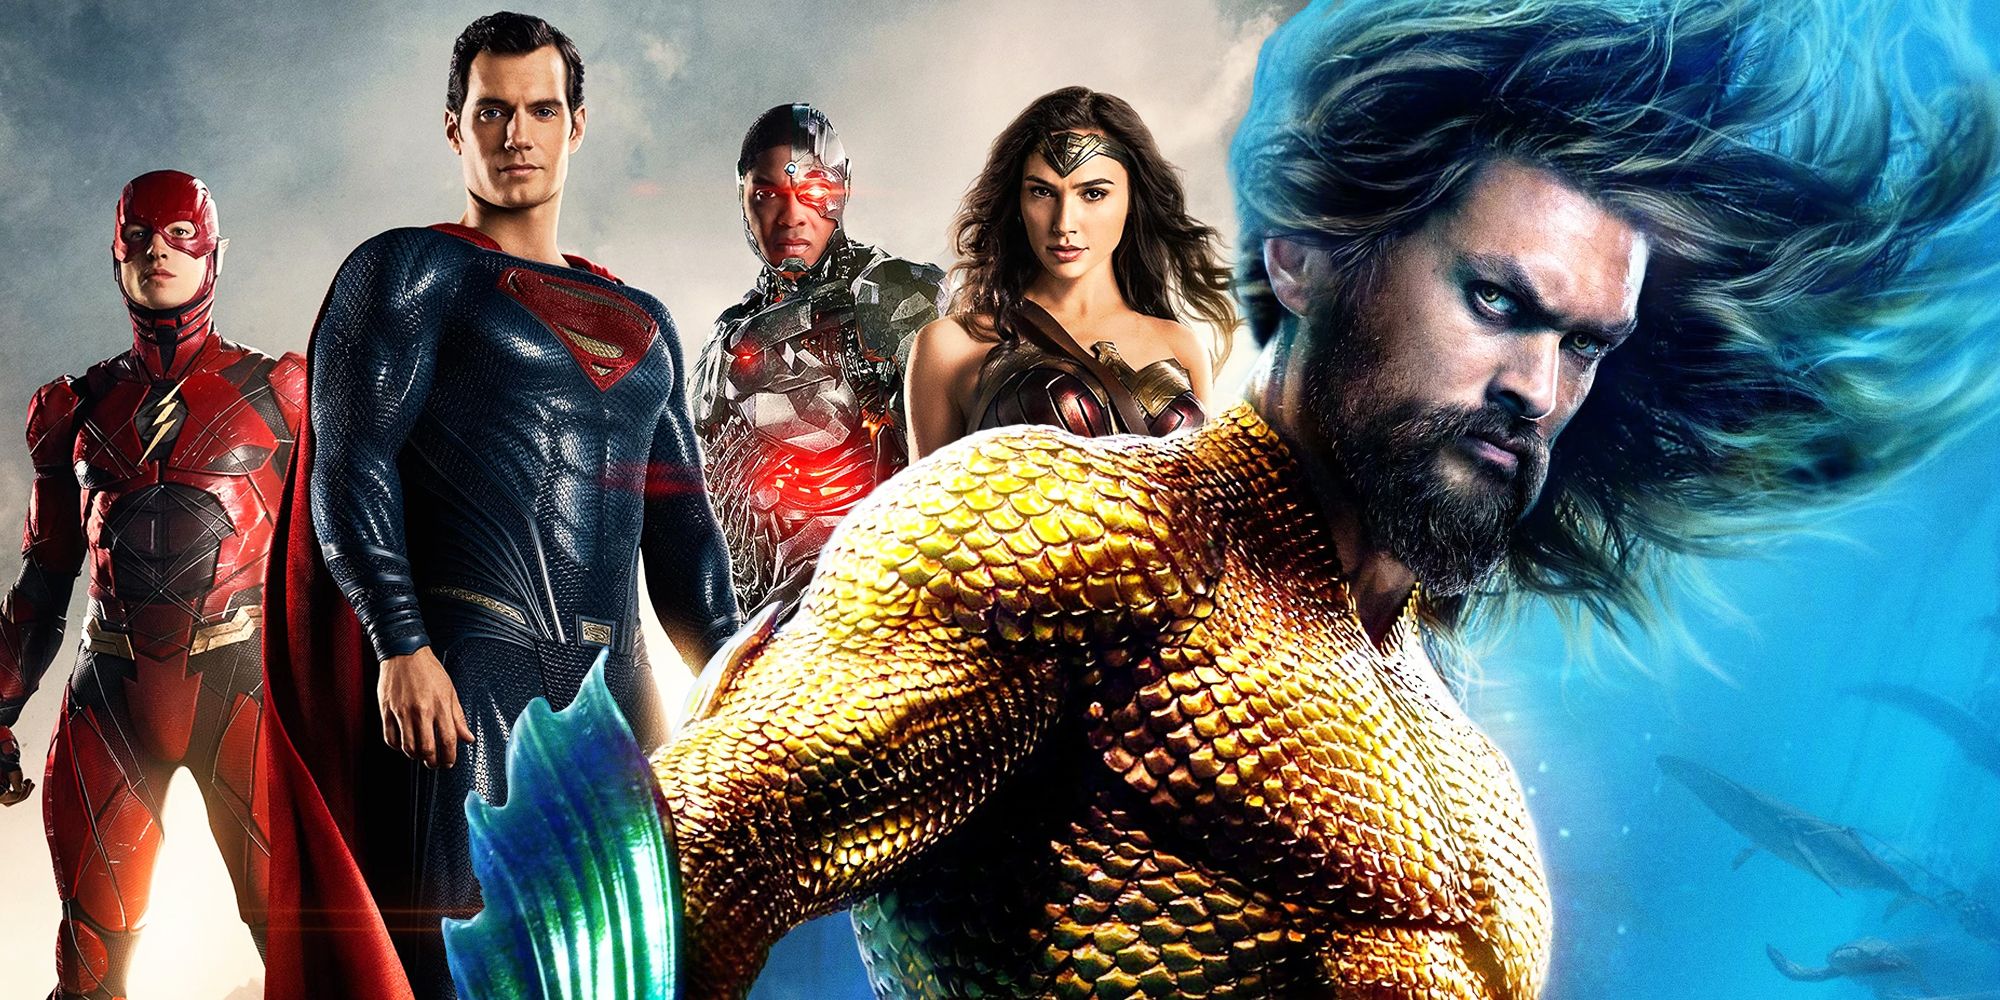 Aquaman and the Justice League.